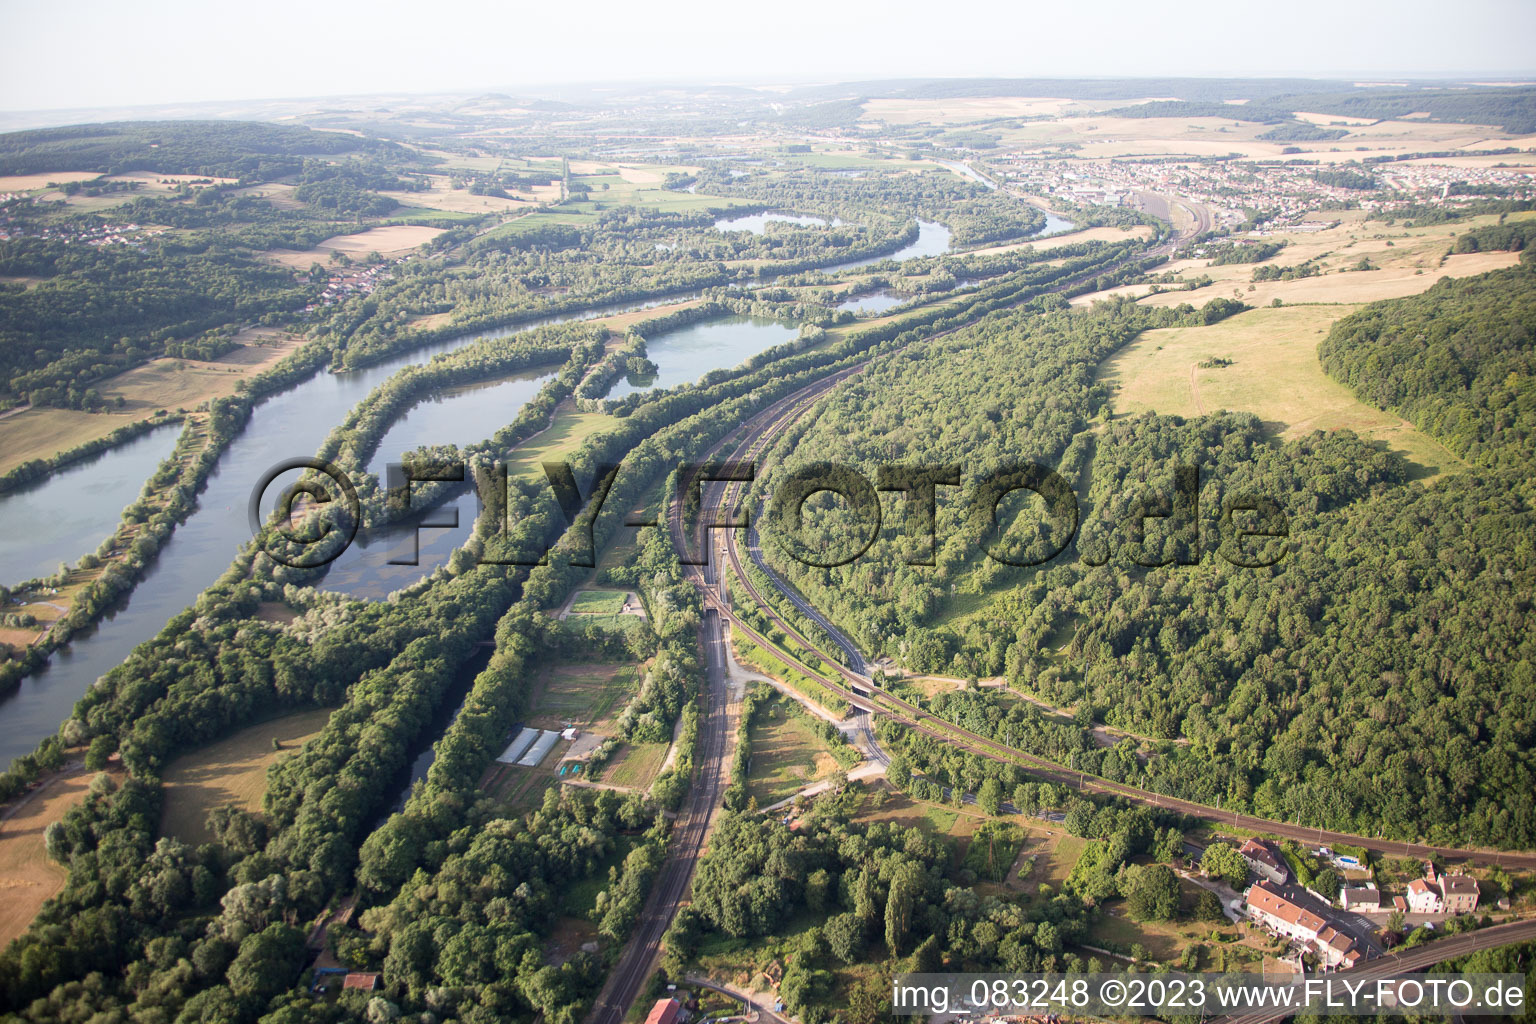 Arnaville in the state Meurthe et Moselle, France seen from above